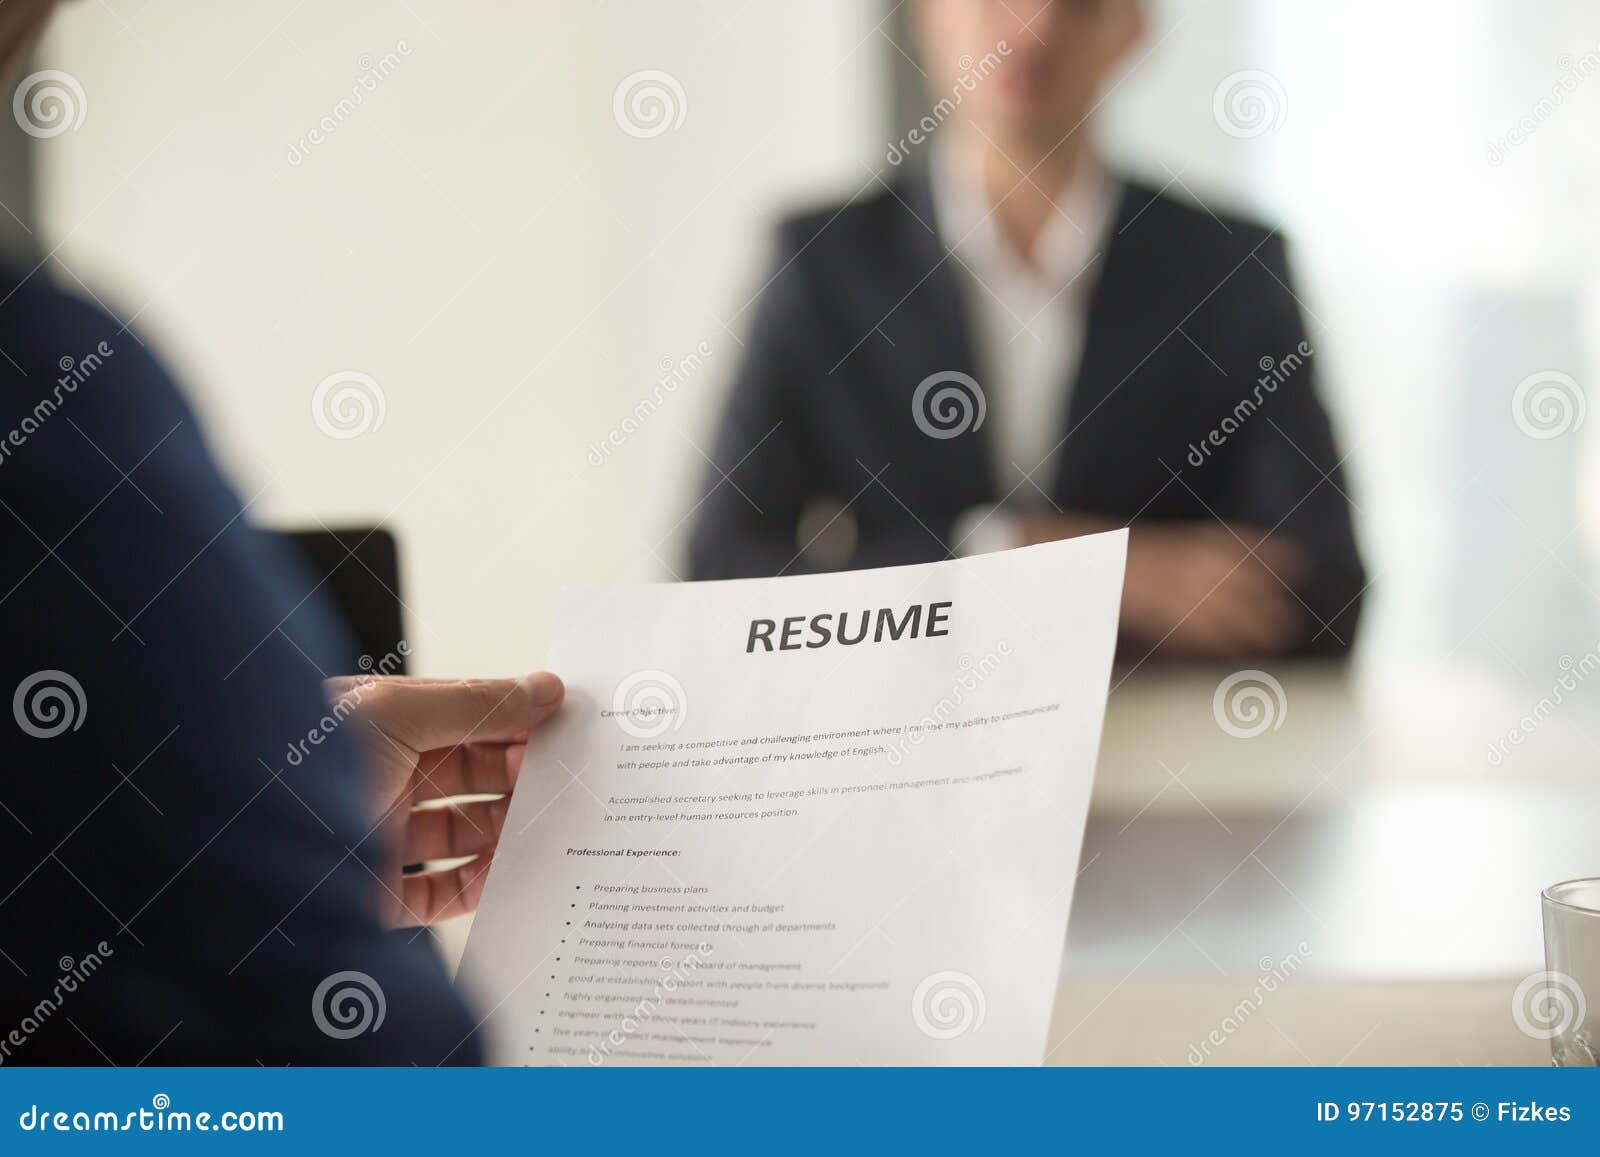 job interview in office, focus on resume, close up view